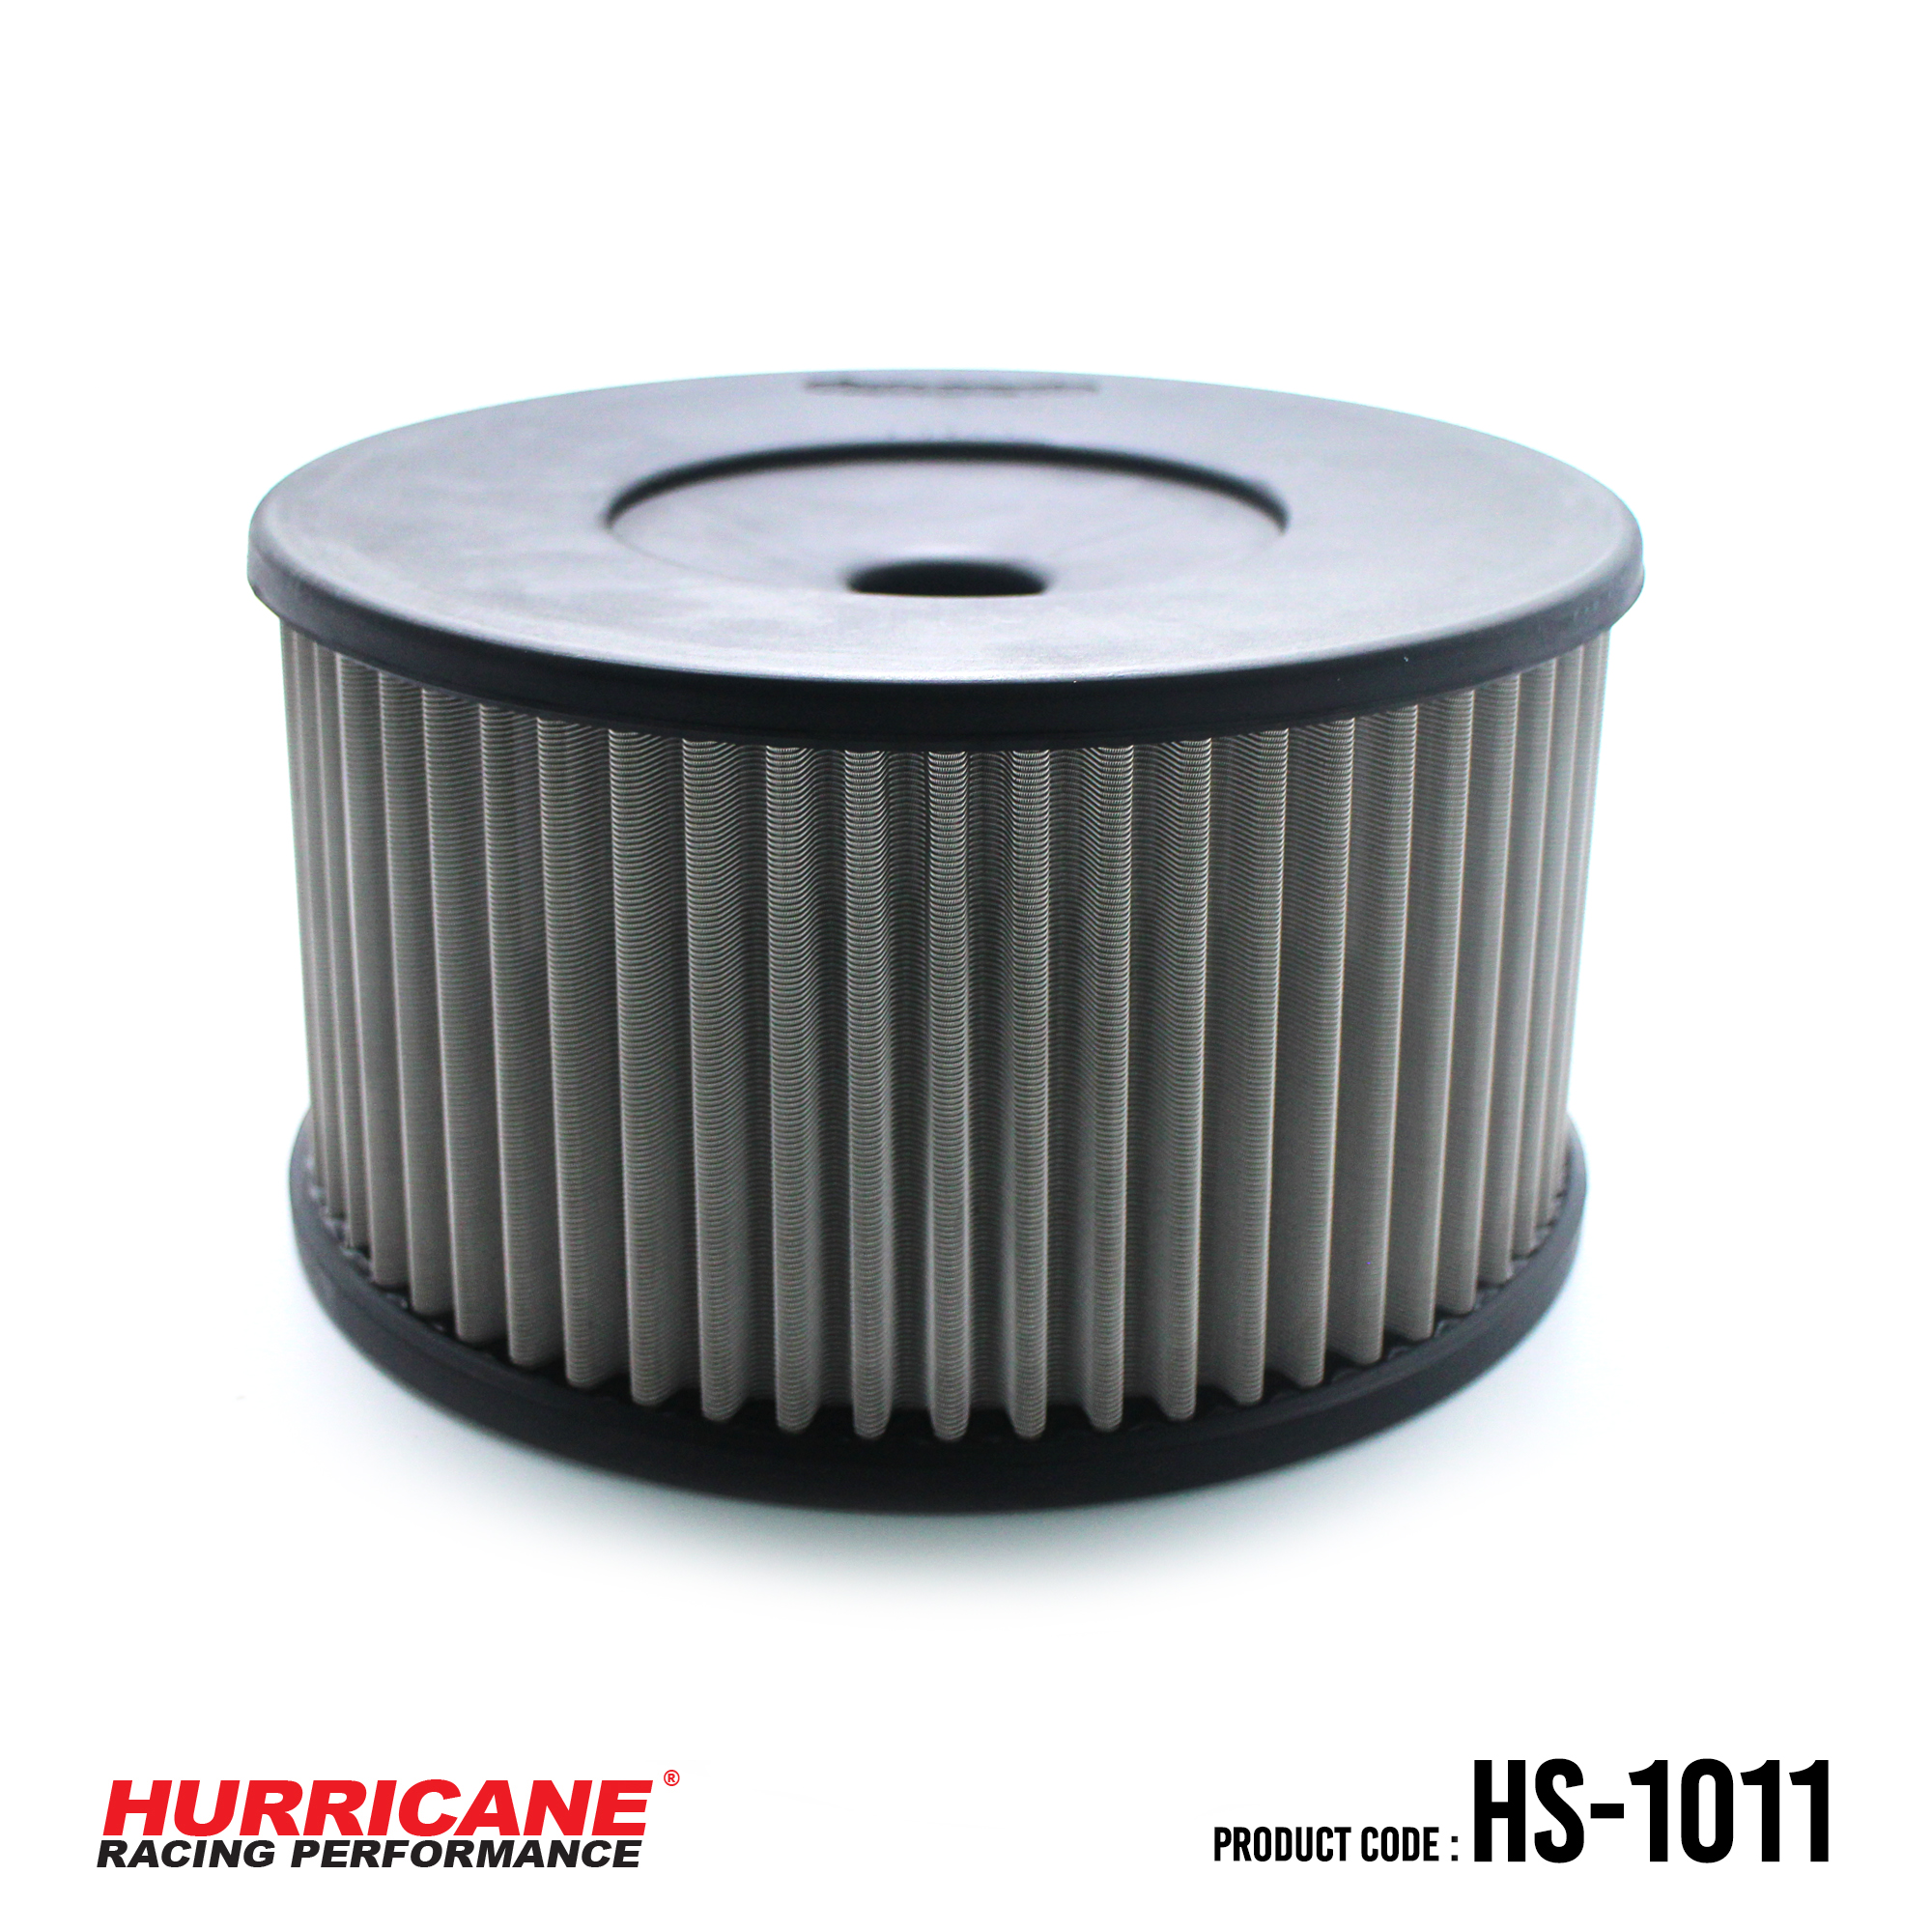 HURRICANE STAINLESS STEEL AIR FILTER FOR HS-1011 Toyota